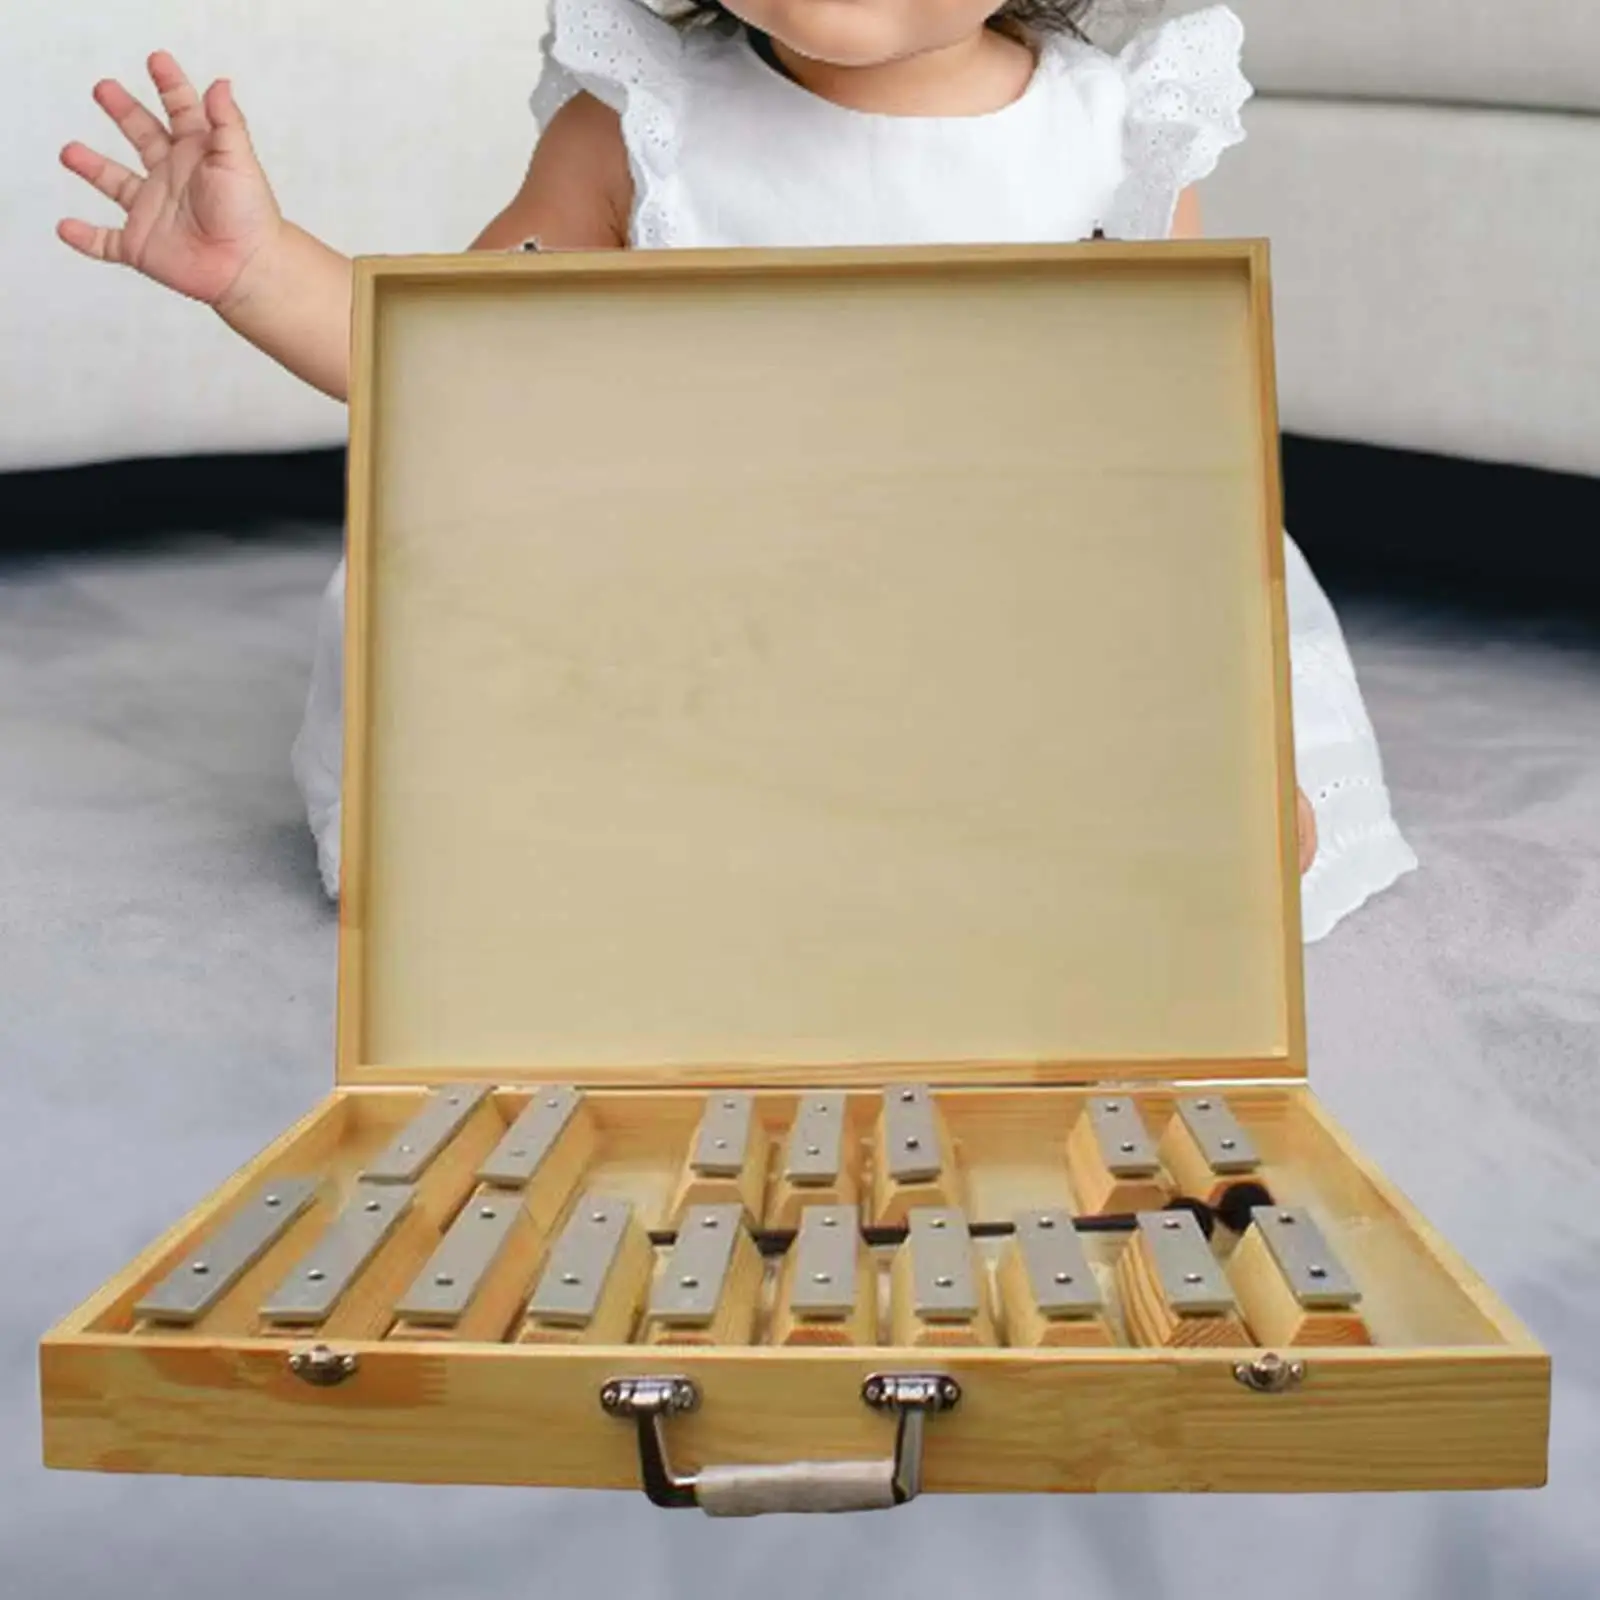 Xylophone for Kids Holiday Birthday Gift for Children Development Toy Professional Musical Percussion Instrument Montessori Toy